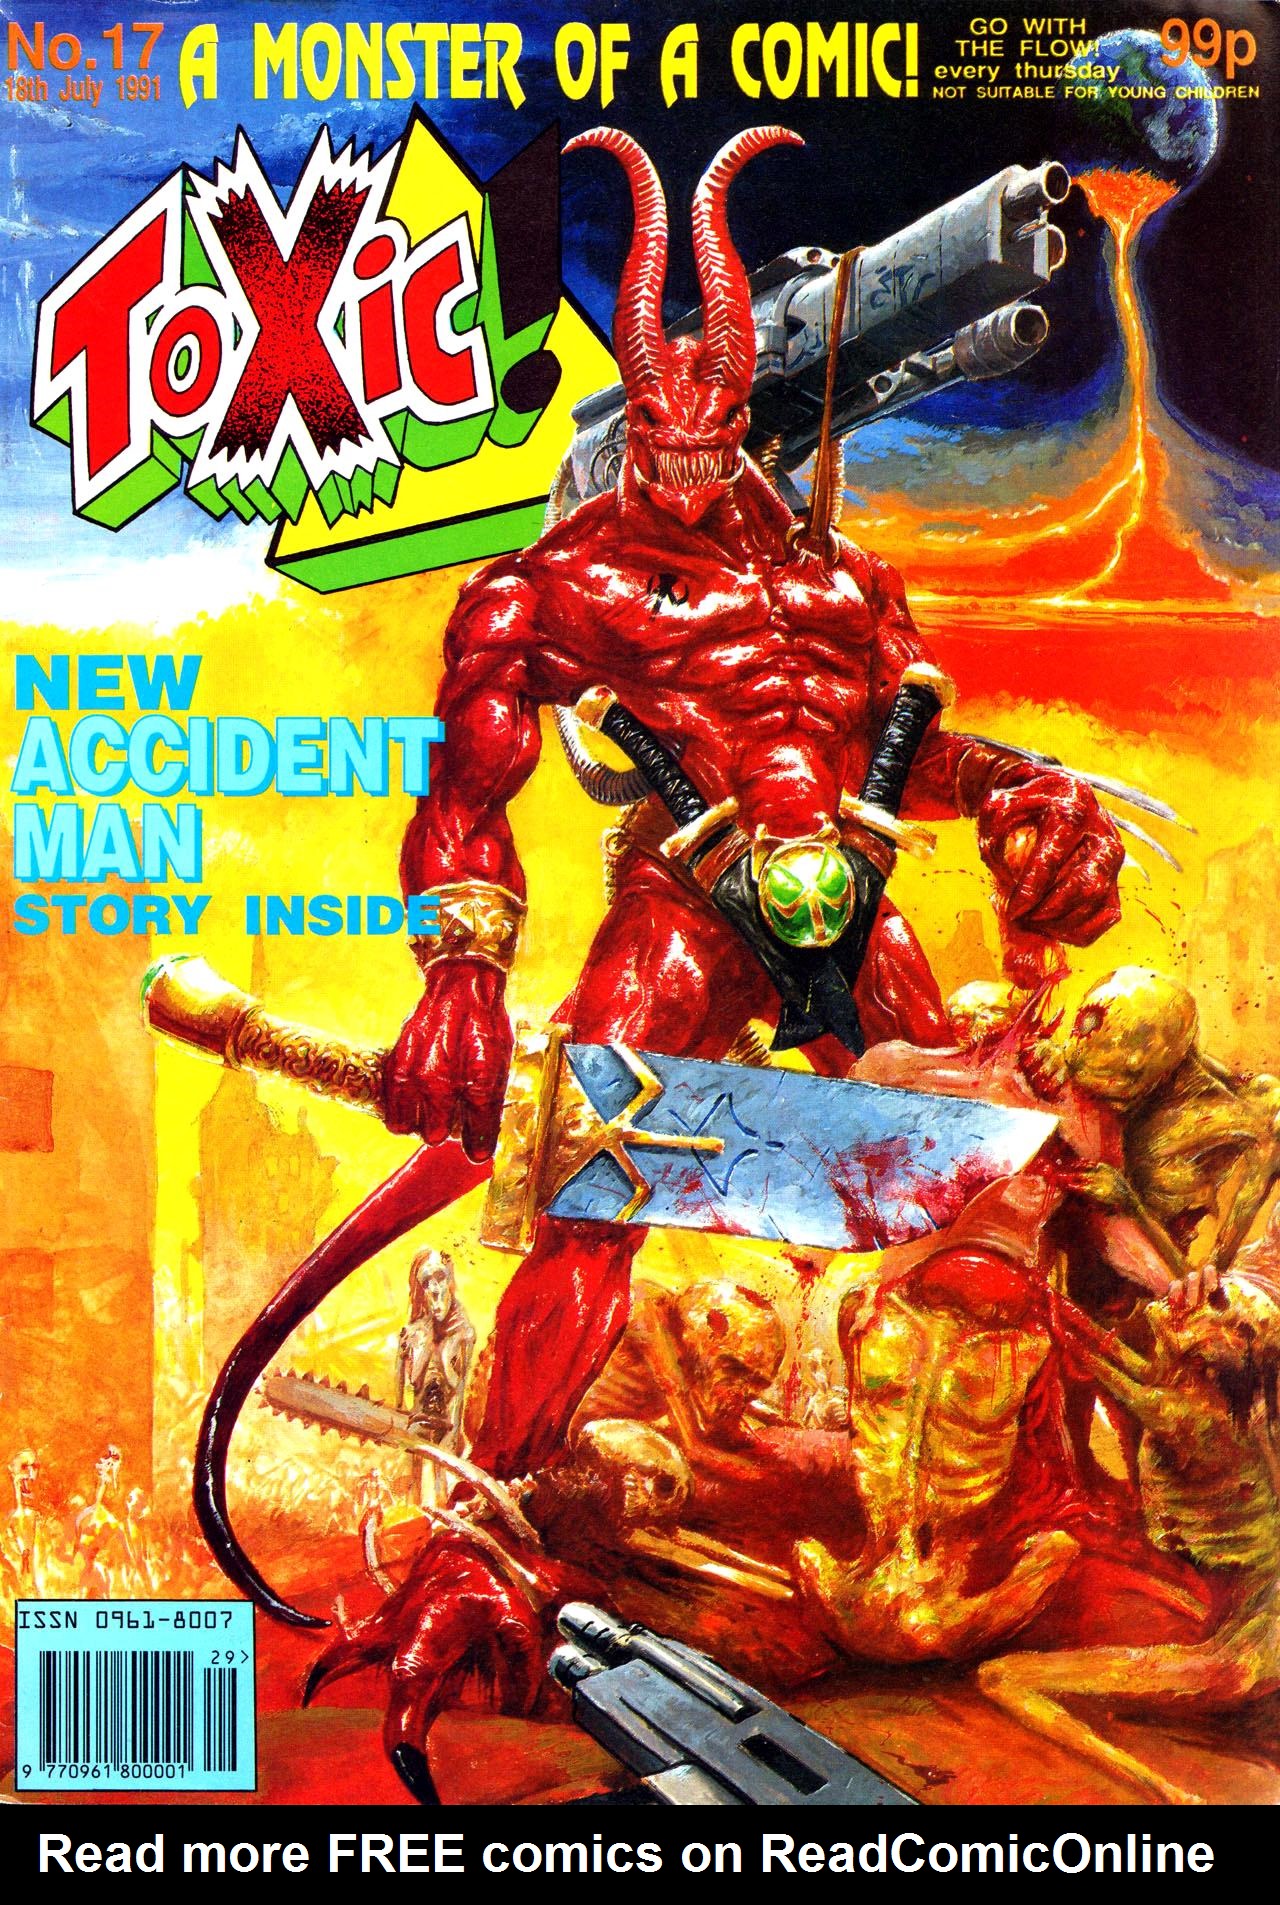 Read online Toxic! comic -  Issue #17 - 1